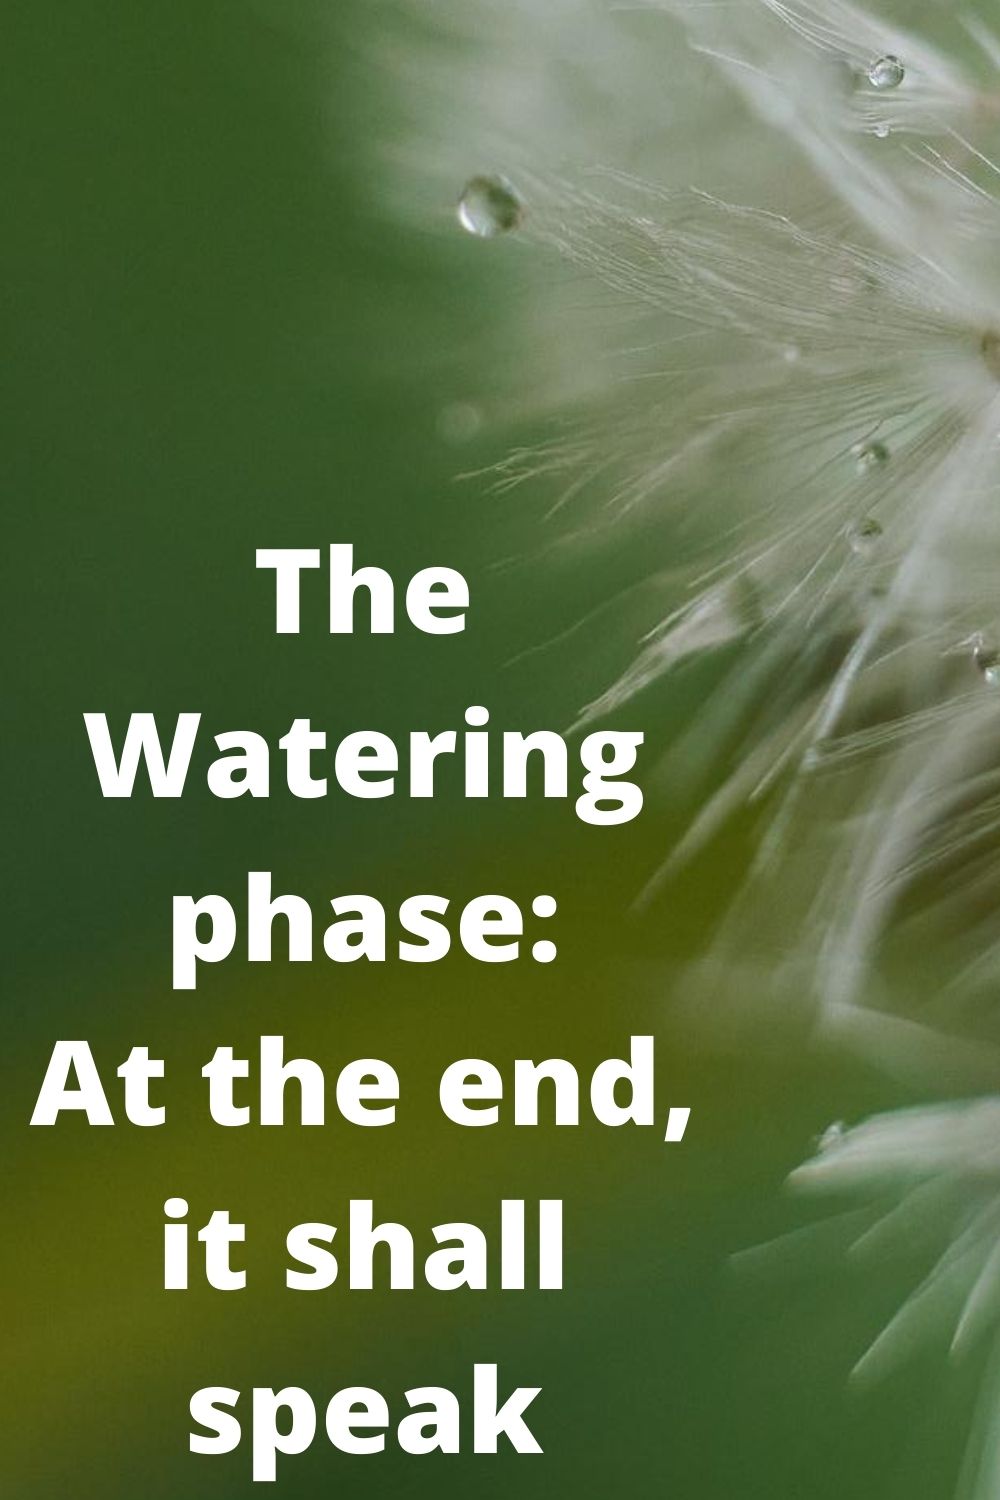 The watering phase: At the end, it shall speak